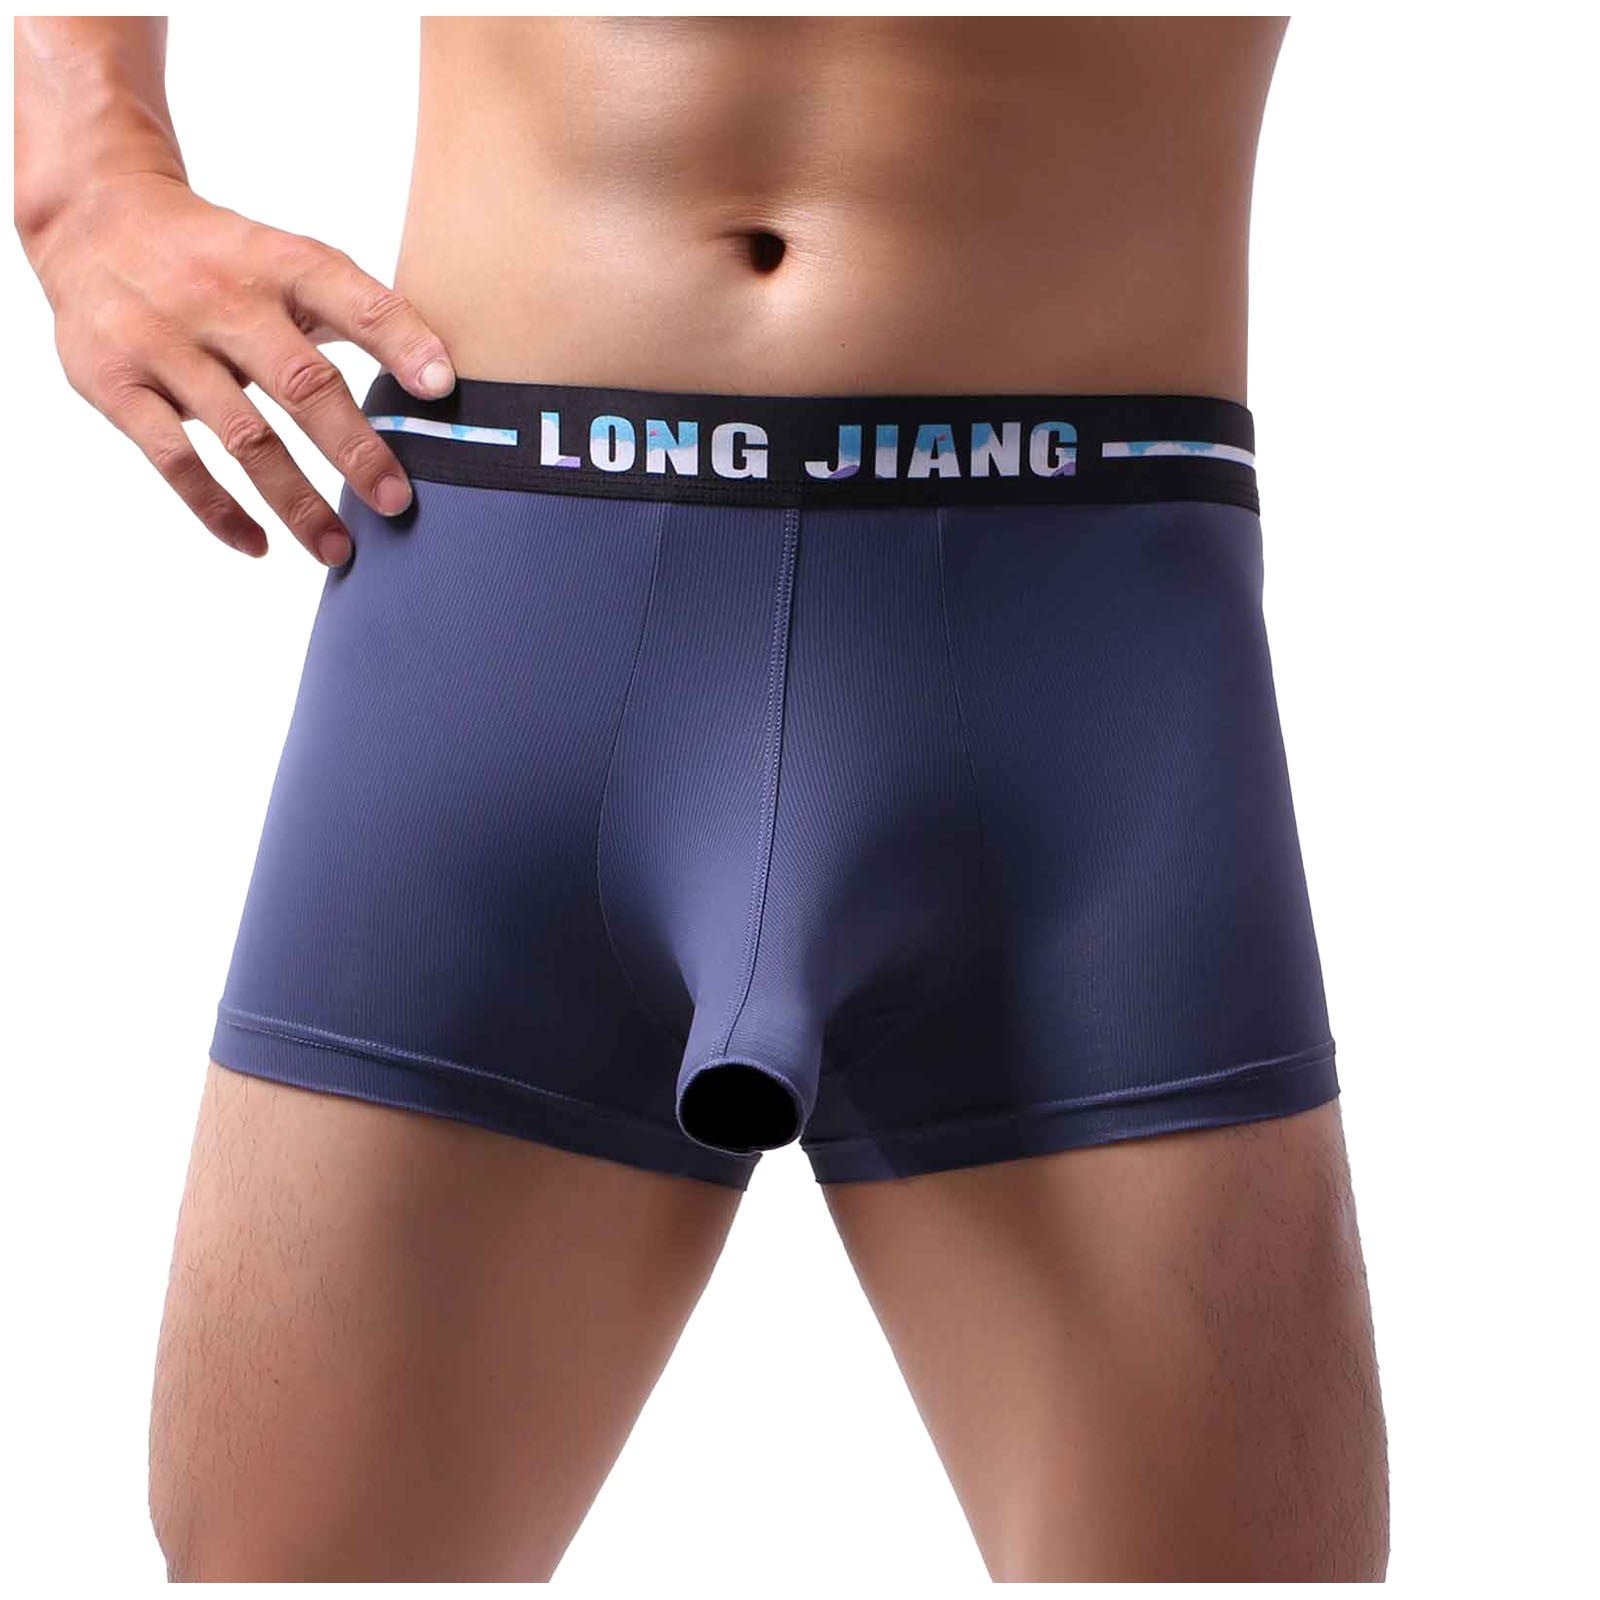 Men's Summer Soft Briefs Underpants Breathable Modal Microfiber Briefs  Knickers Shorts Sexy Underwear Teen Gifts